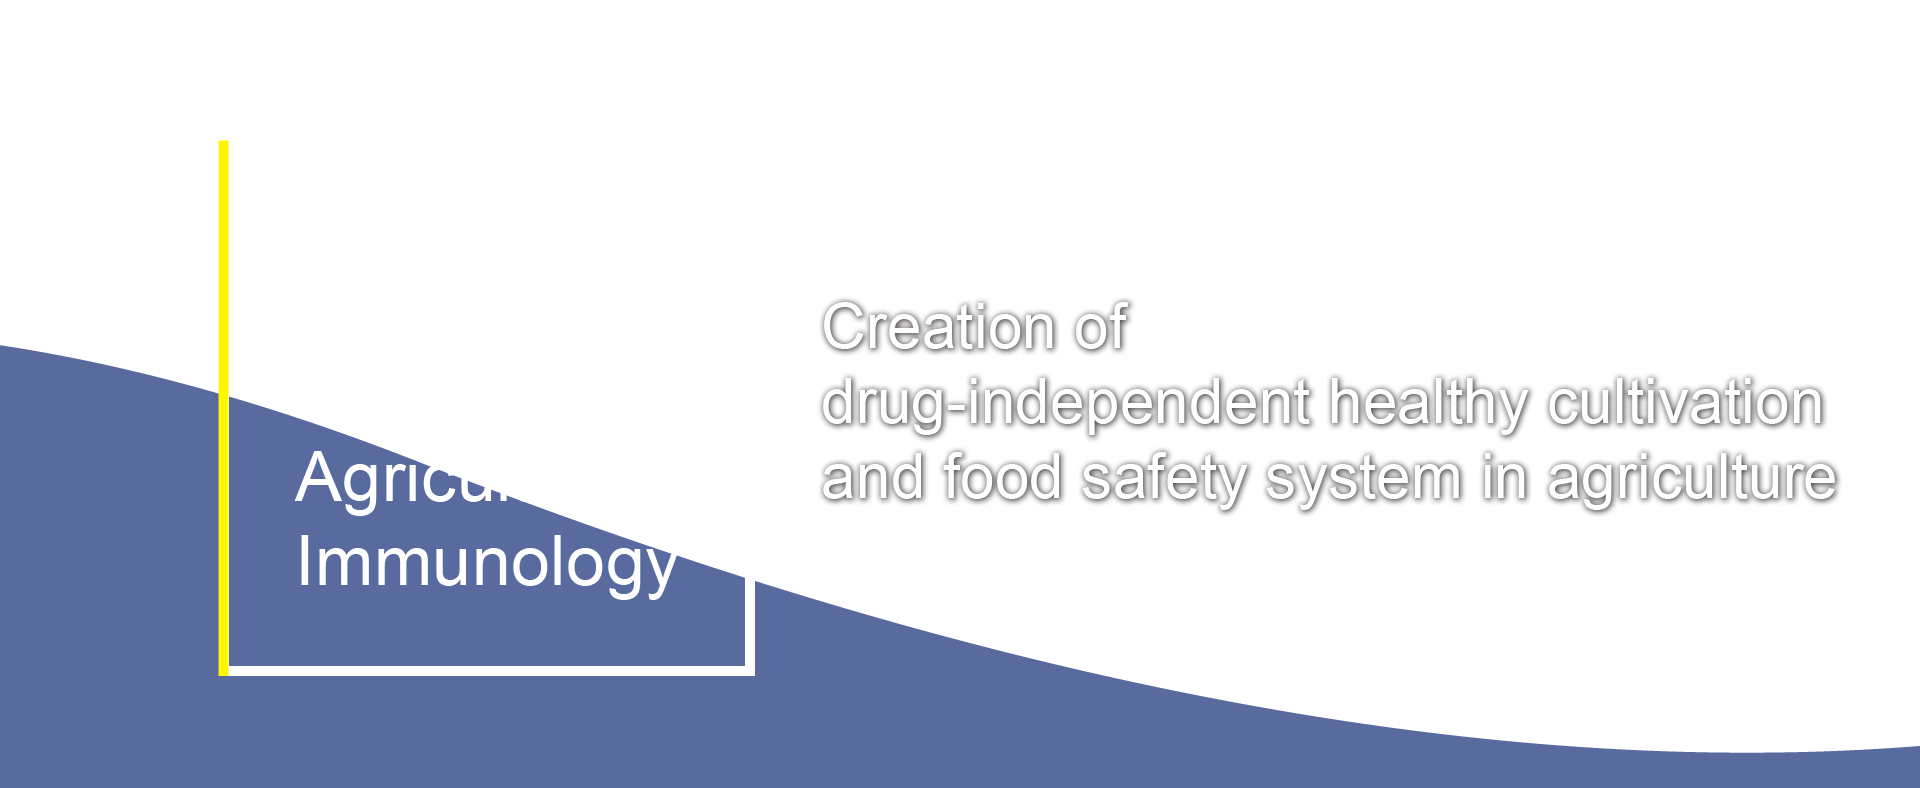 International Education and Research Center for Food and Agricultural Immunology / Creation of
drug-independent healthy cultivation and food safety system in agriculture